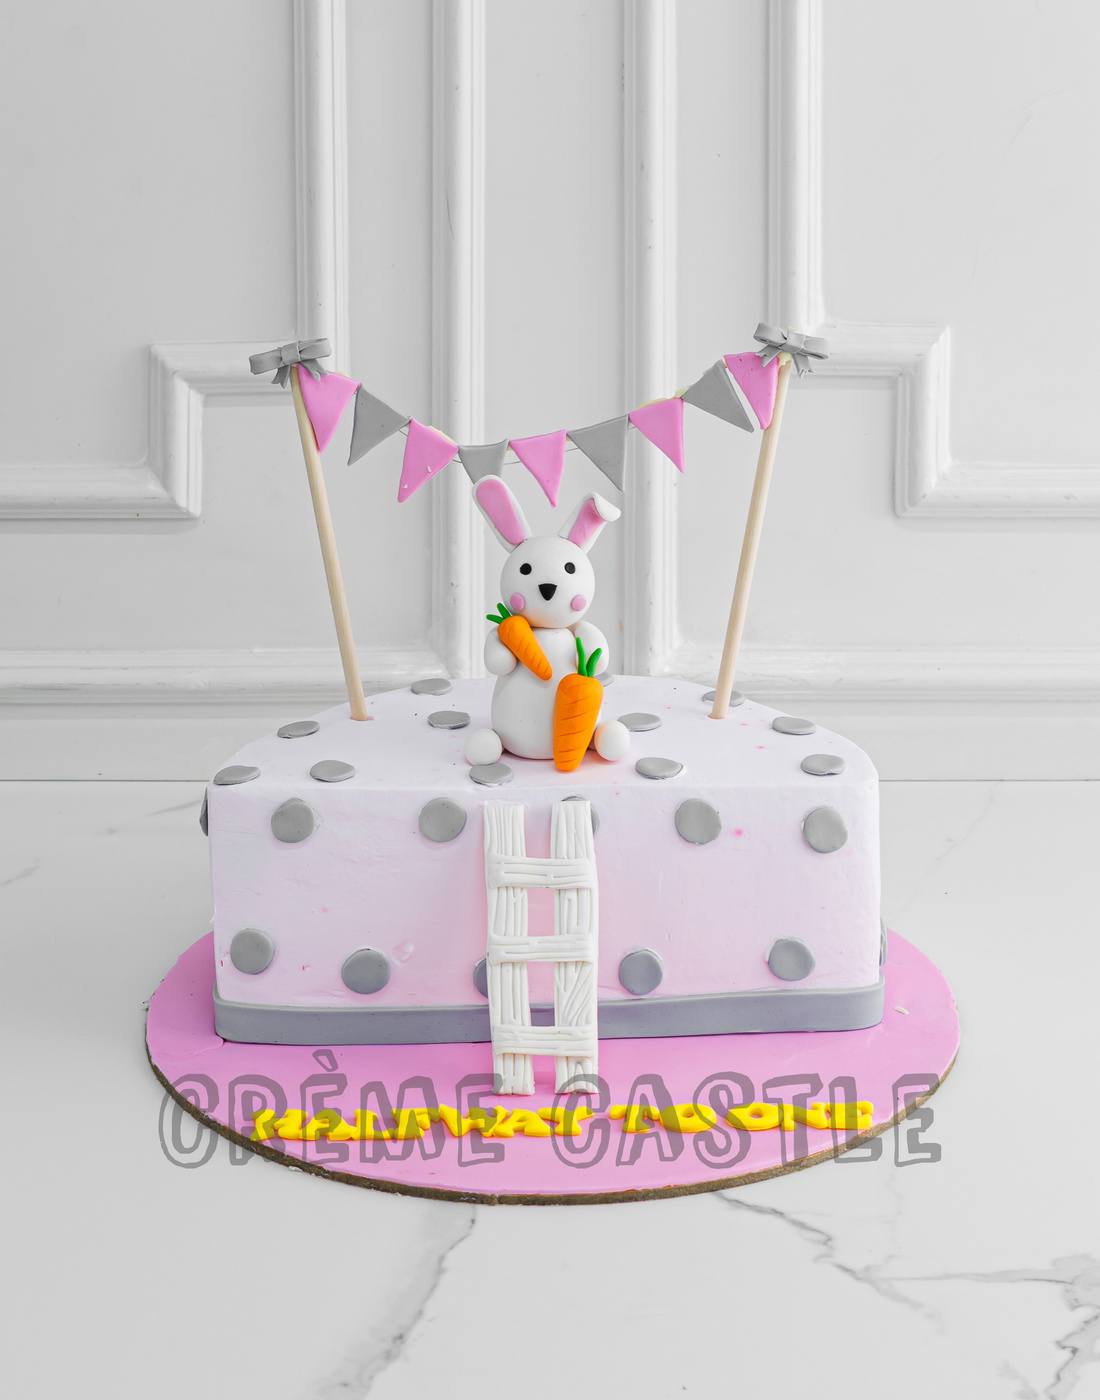 Peter Rabbit Themed Baby Shower Cake - With Characters And Flowers